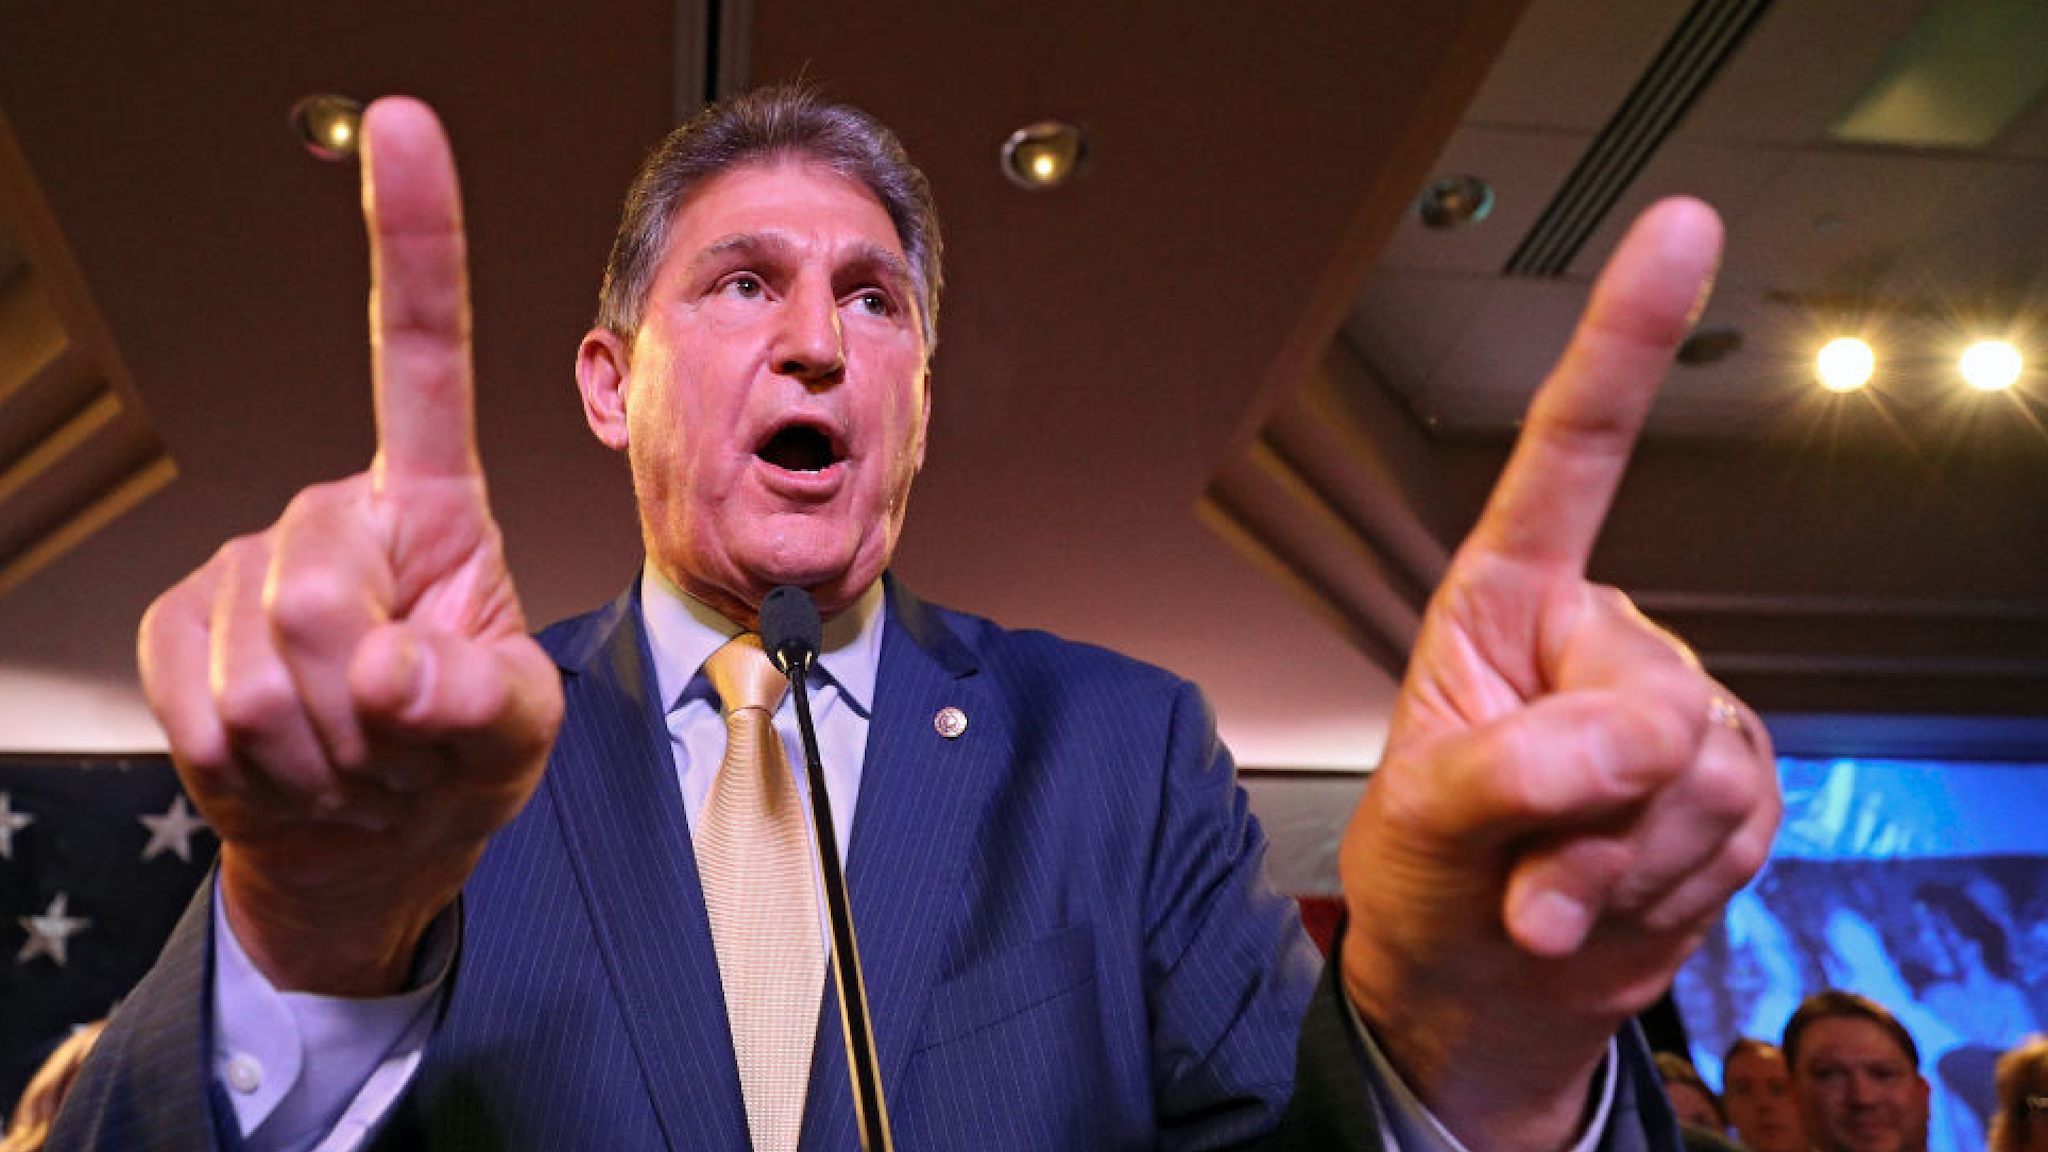 CHARLESTON, WV - NOVEMBER 06: Sen. Joe Manchin (D-WV) celebrates at his election day victory party at the Embassy Suites on November 6, 2018 in Charleston, West Virginia. Manchin won his second full Senate term after he defeated West Virginia Republican S